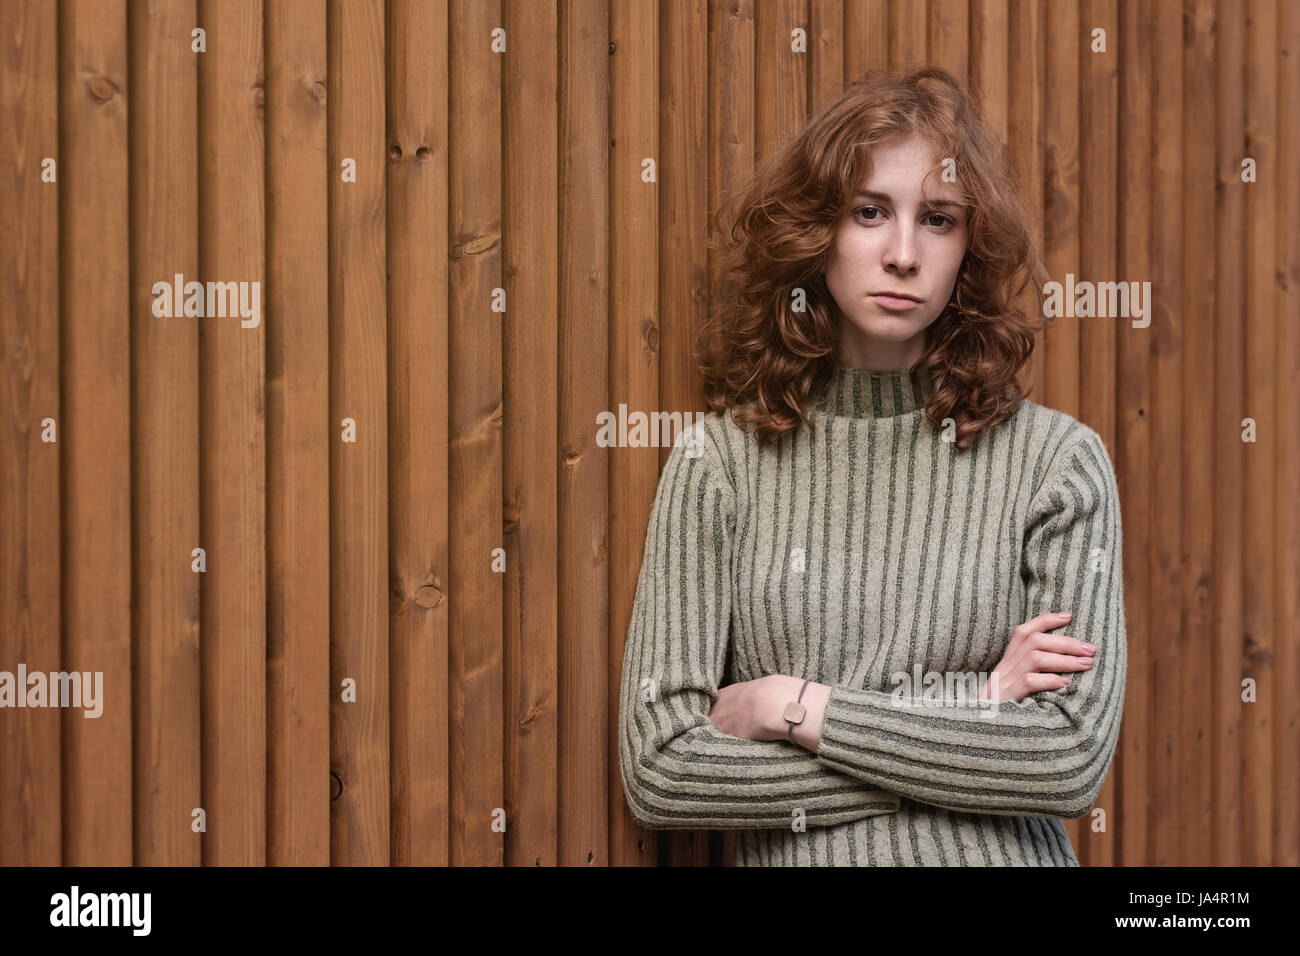 A beautiful red-haired girl in a green sweater is standing by the wooden wall. She crosses her arms and looks severely at the camera. Stock Photo